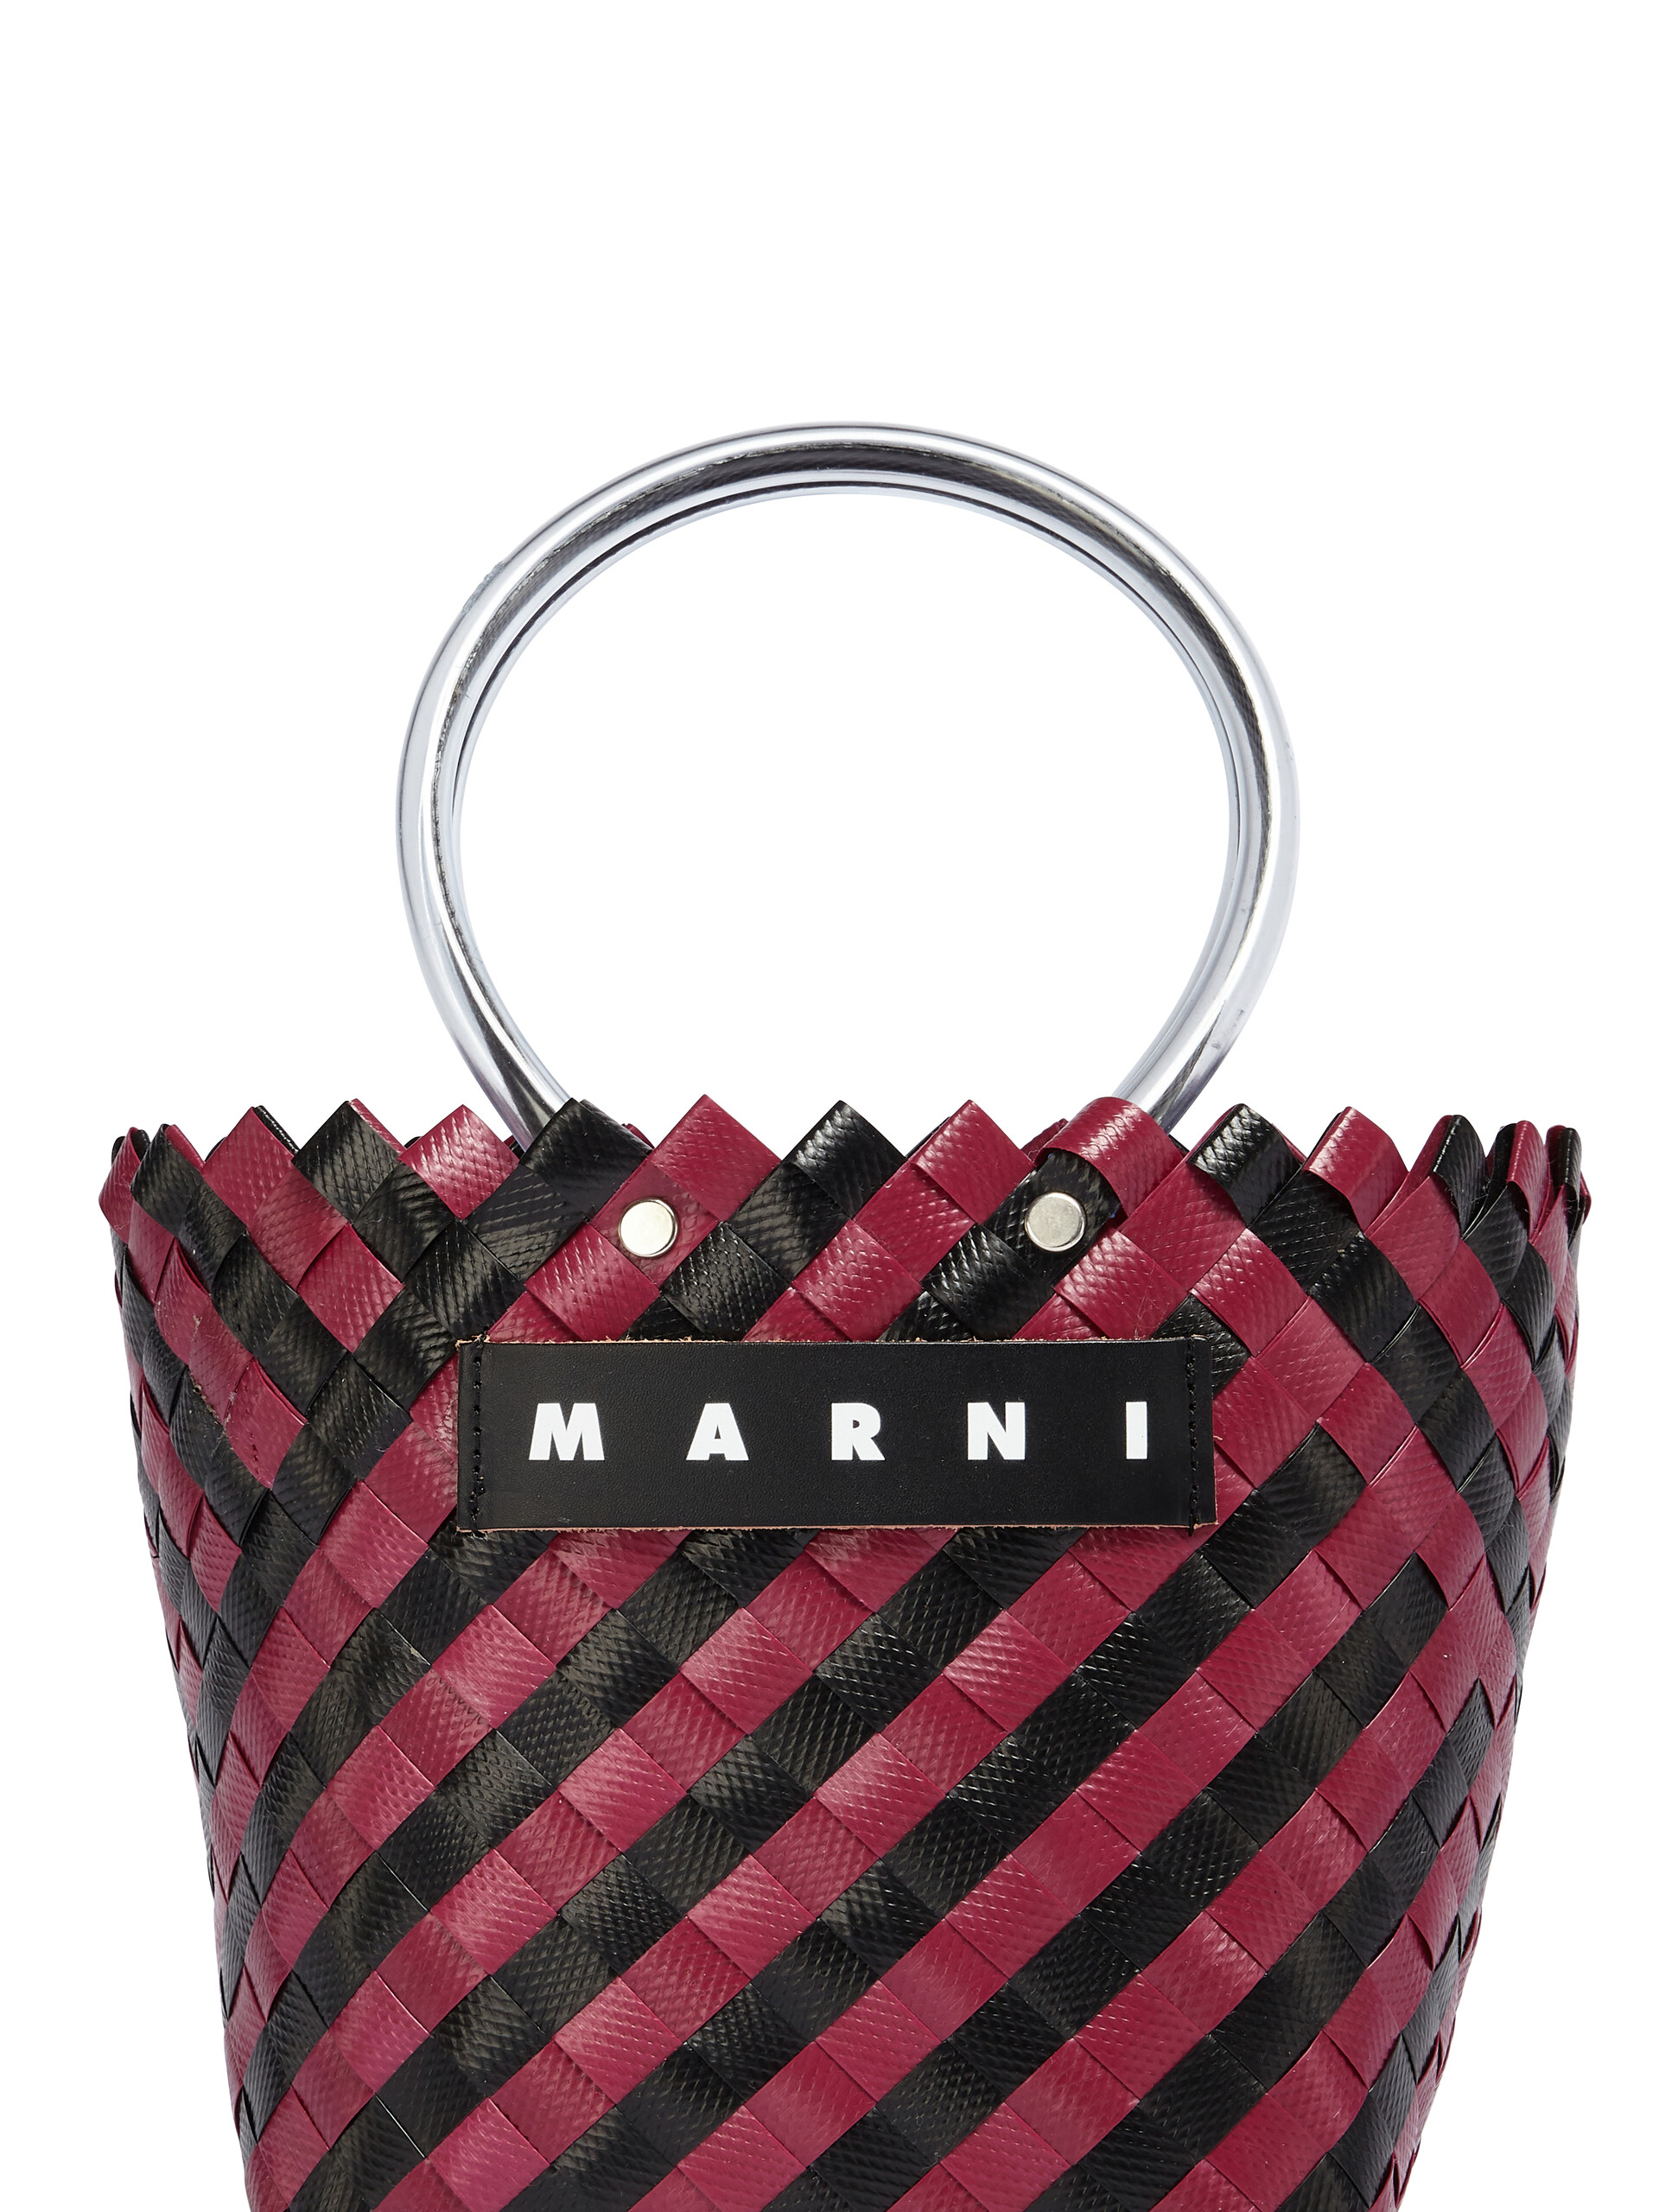 MARNI MARKET TAHA bag in black and burgundy woven material - Shopping Bags - Image 4